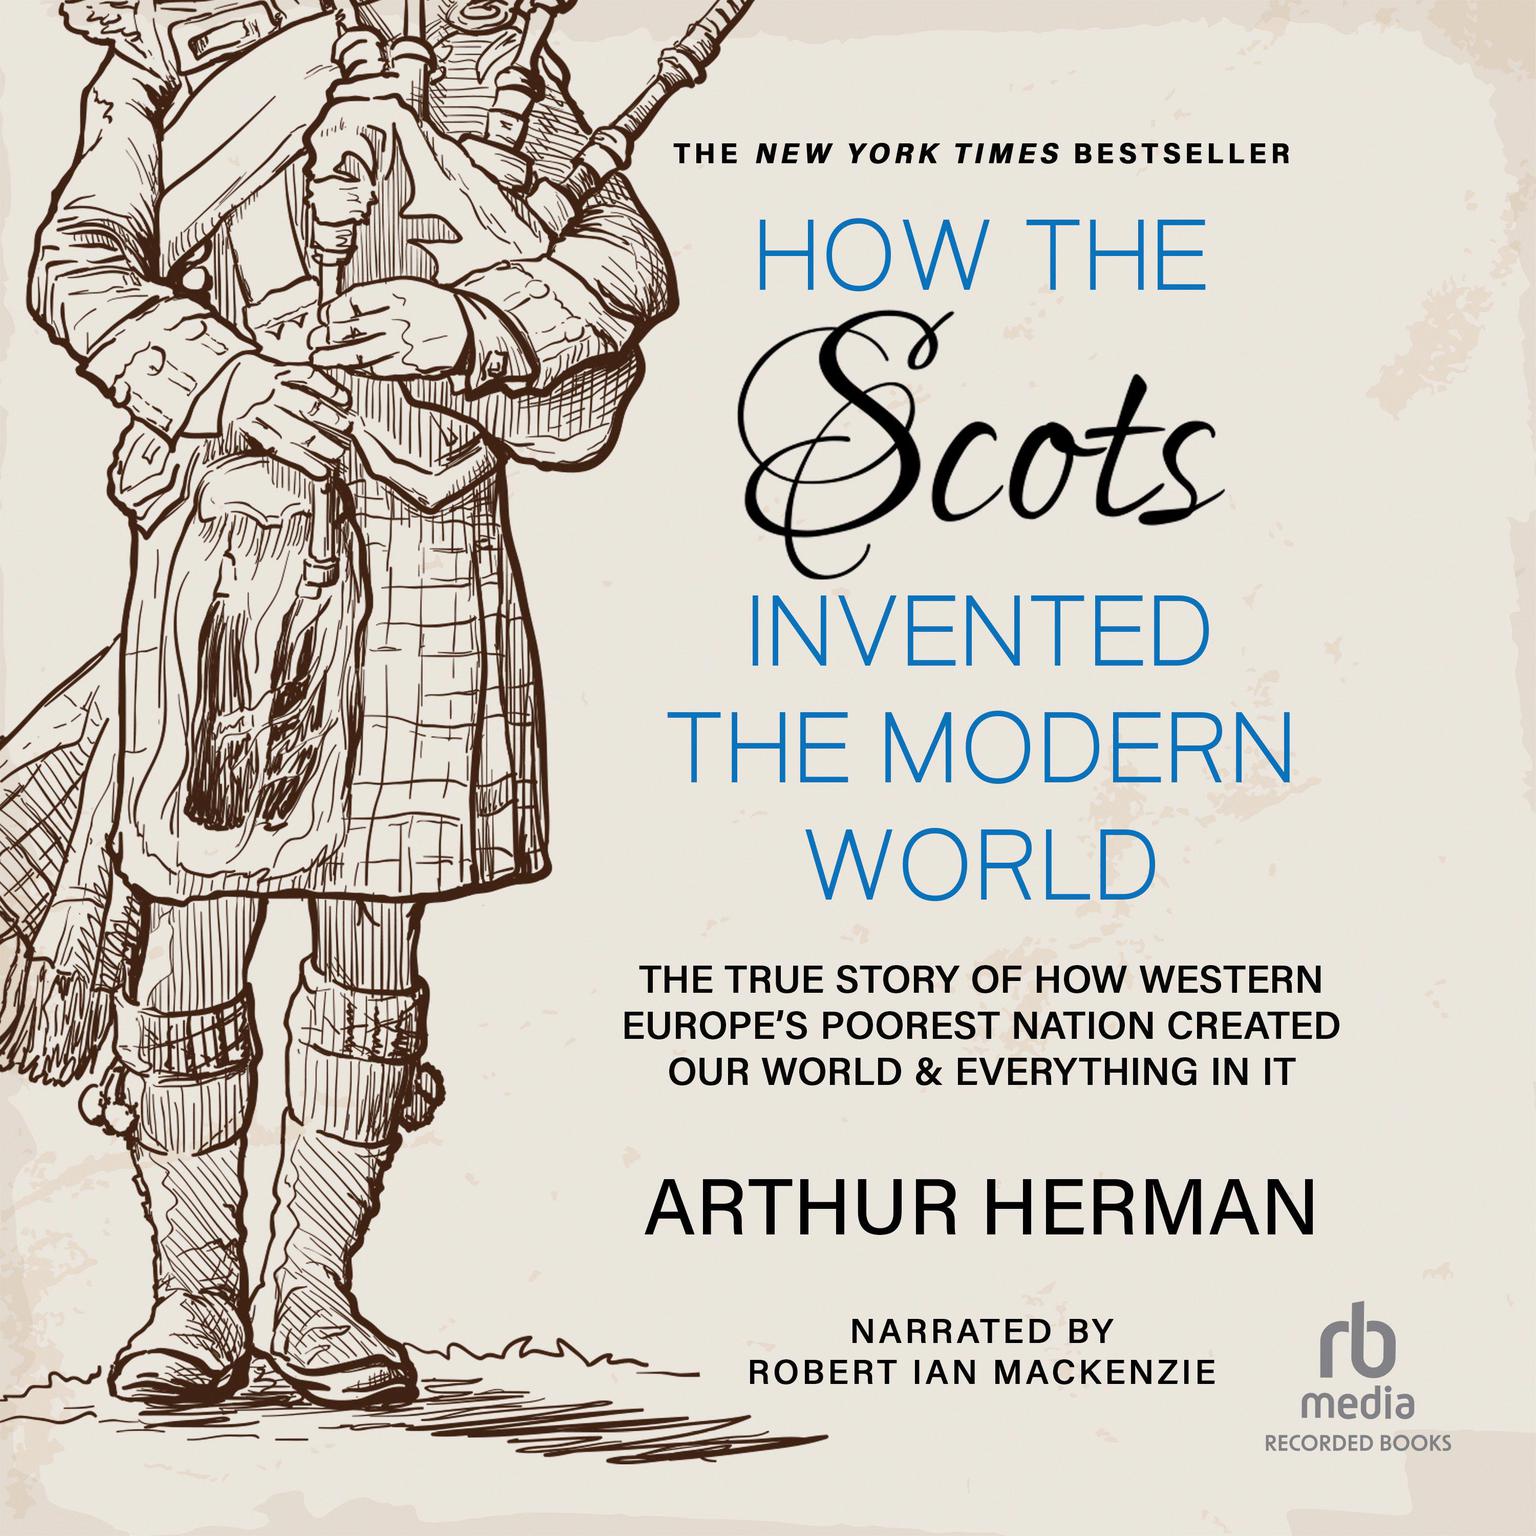 How the Scots Invented the Modern World: The True Story of How Western Europes Poorest Nation Created Our World and Everything in It Audiobook, by Arthur Herman